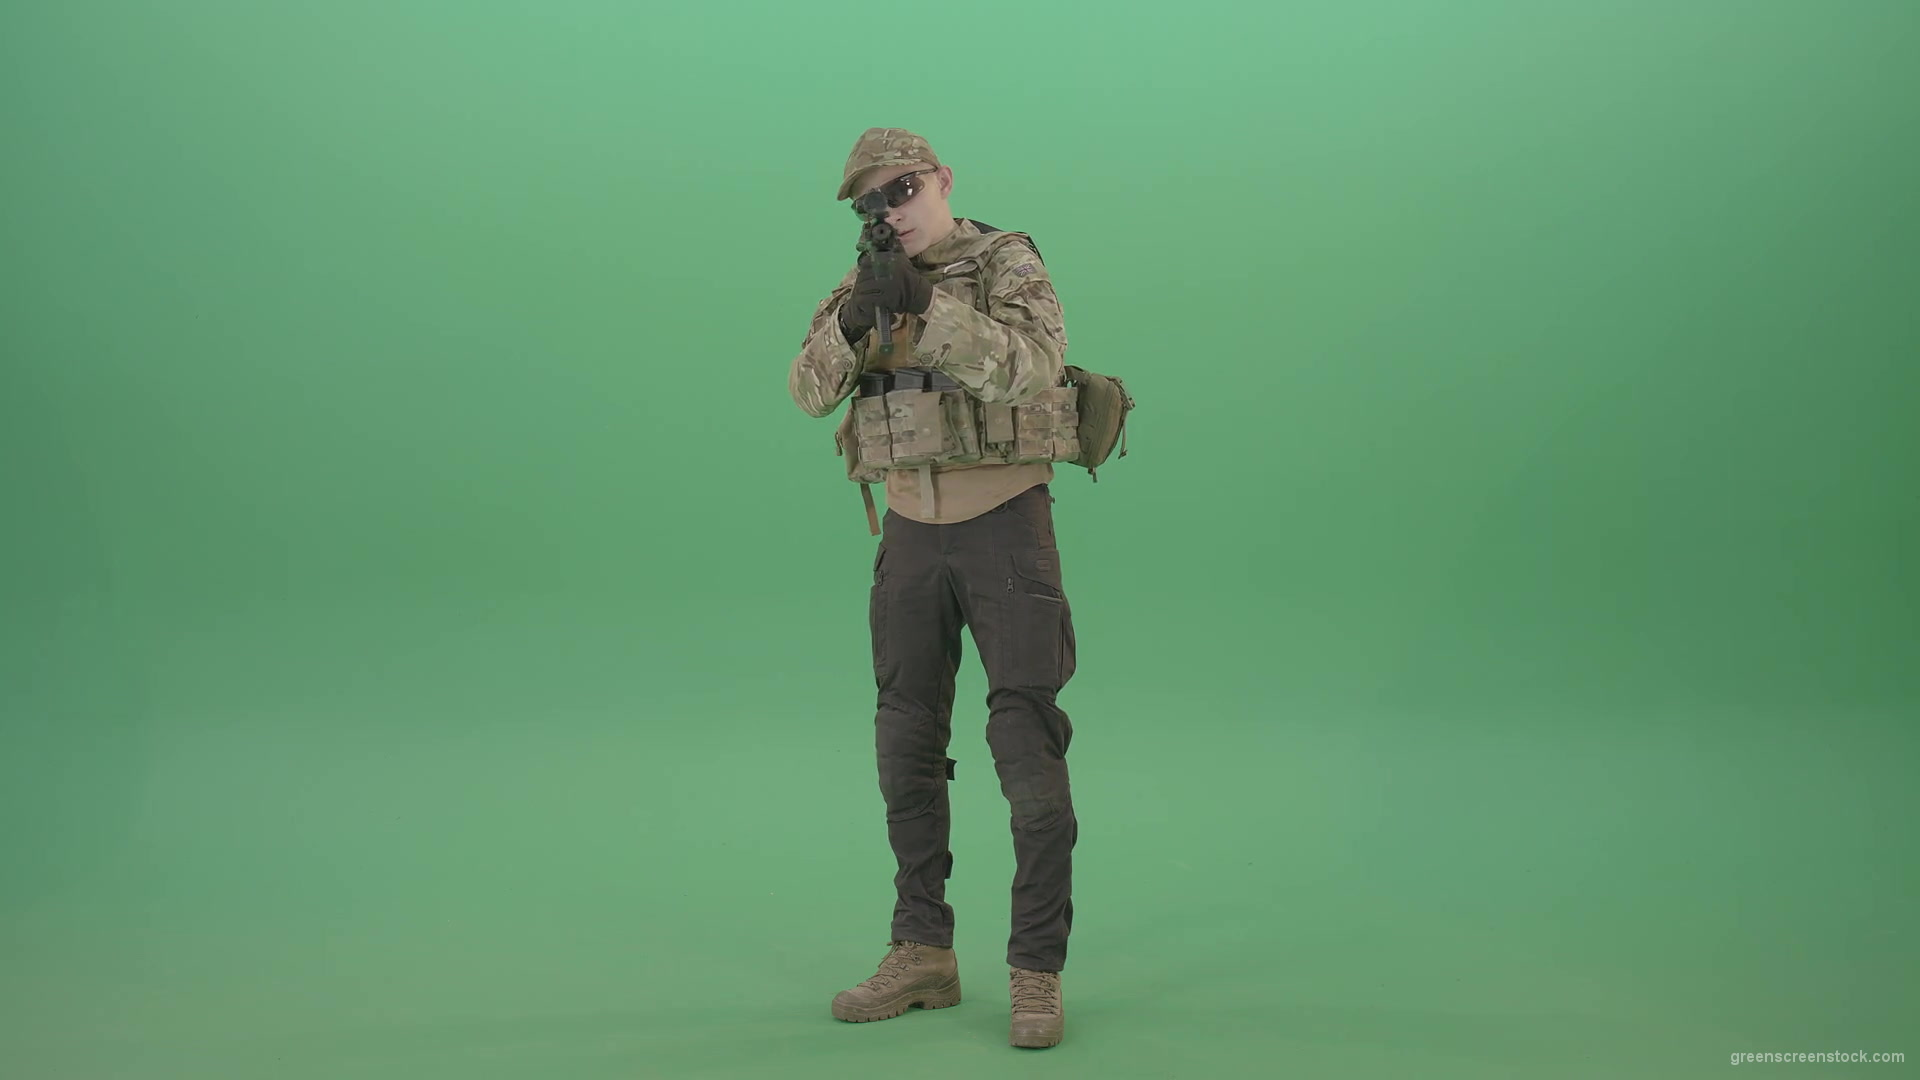 Counter-strike-army-police-man-shooting-enemy-from-machine-gun-in-Camouflage-uniform-on-green-screen-4K-Video-Footage-1920_006 Green Screen Stock